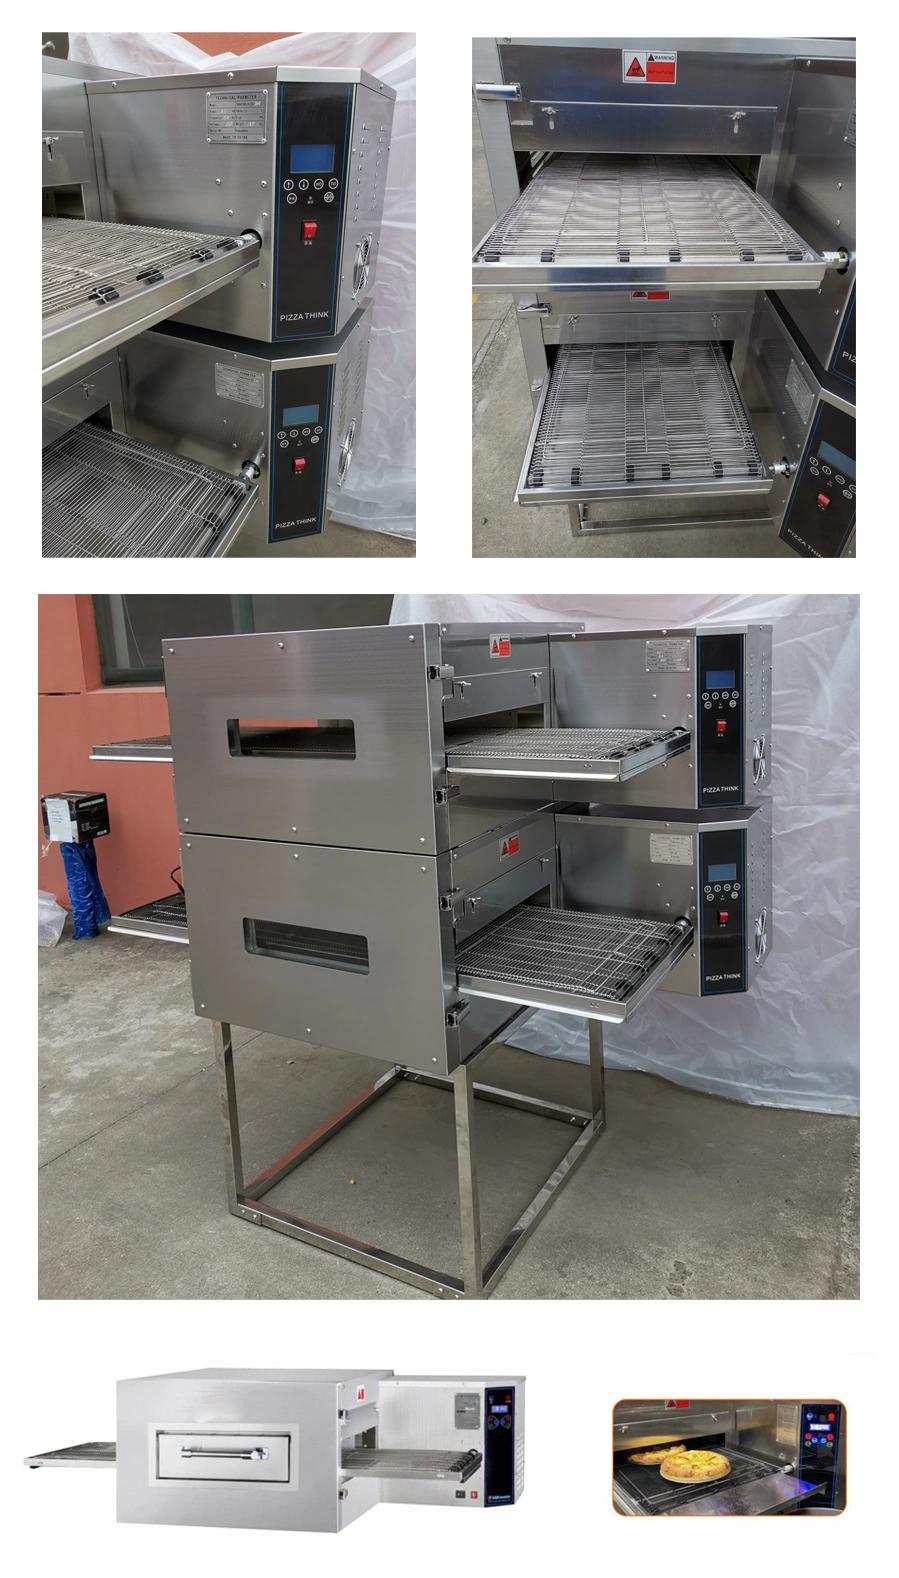 Bakery Equipments Electric Baking Bakery Commericial Pizza Oven for Sale